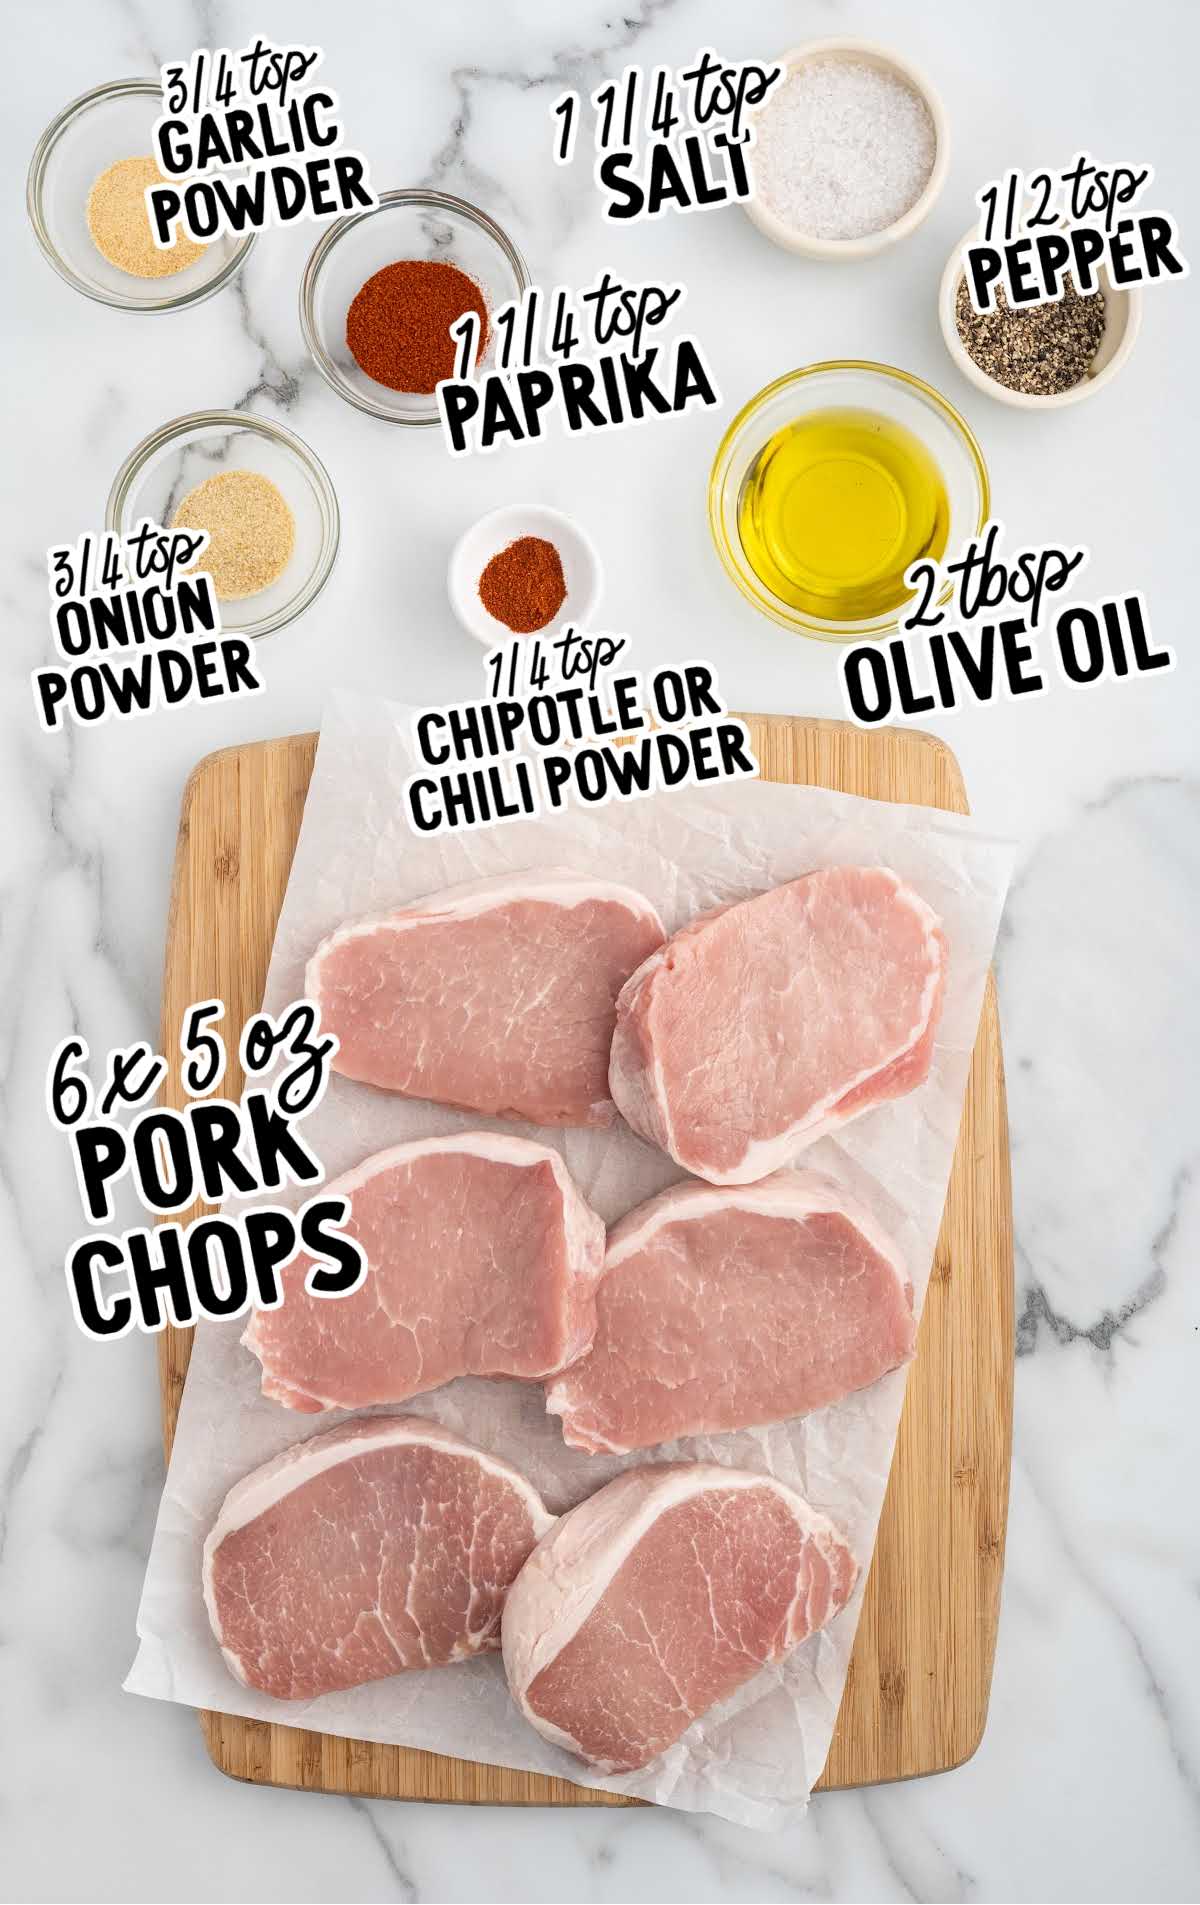 Boneless Pork Chops in Air Fryer raw ingredients that are labeled